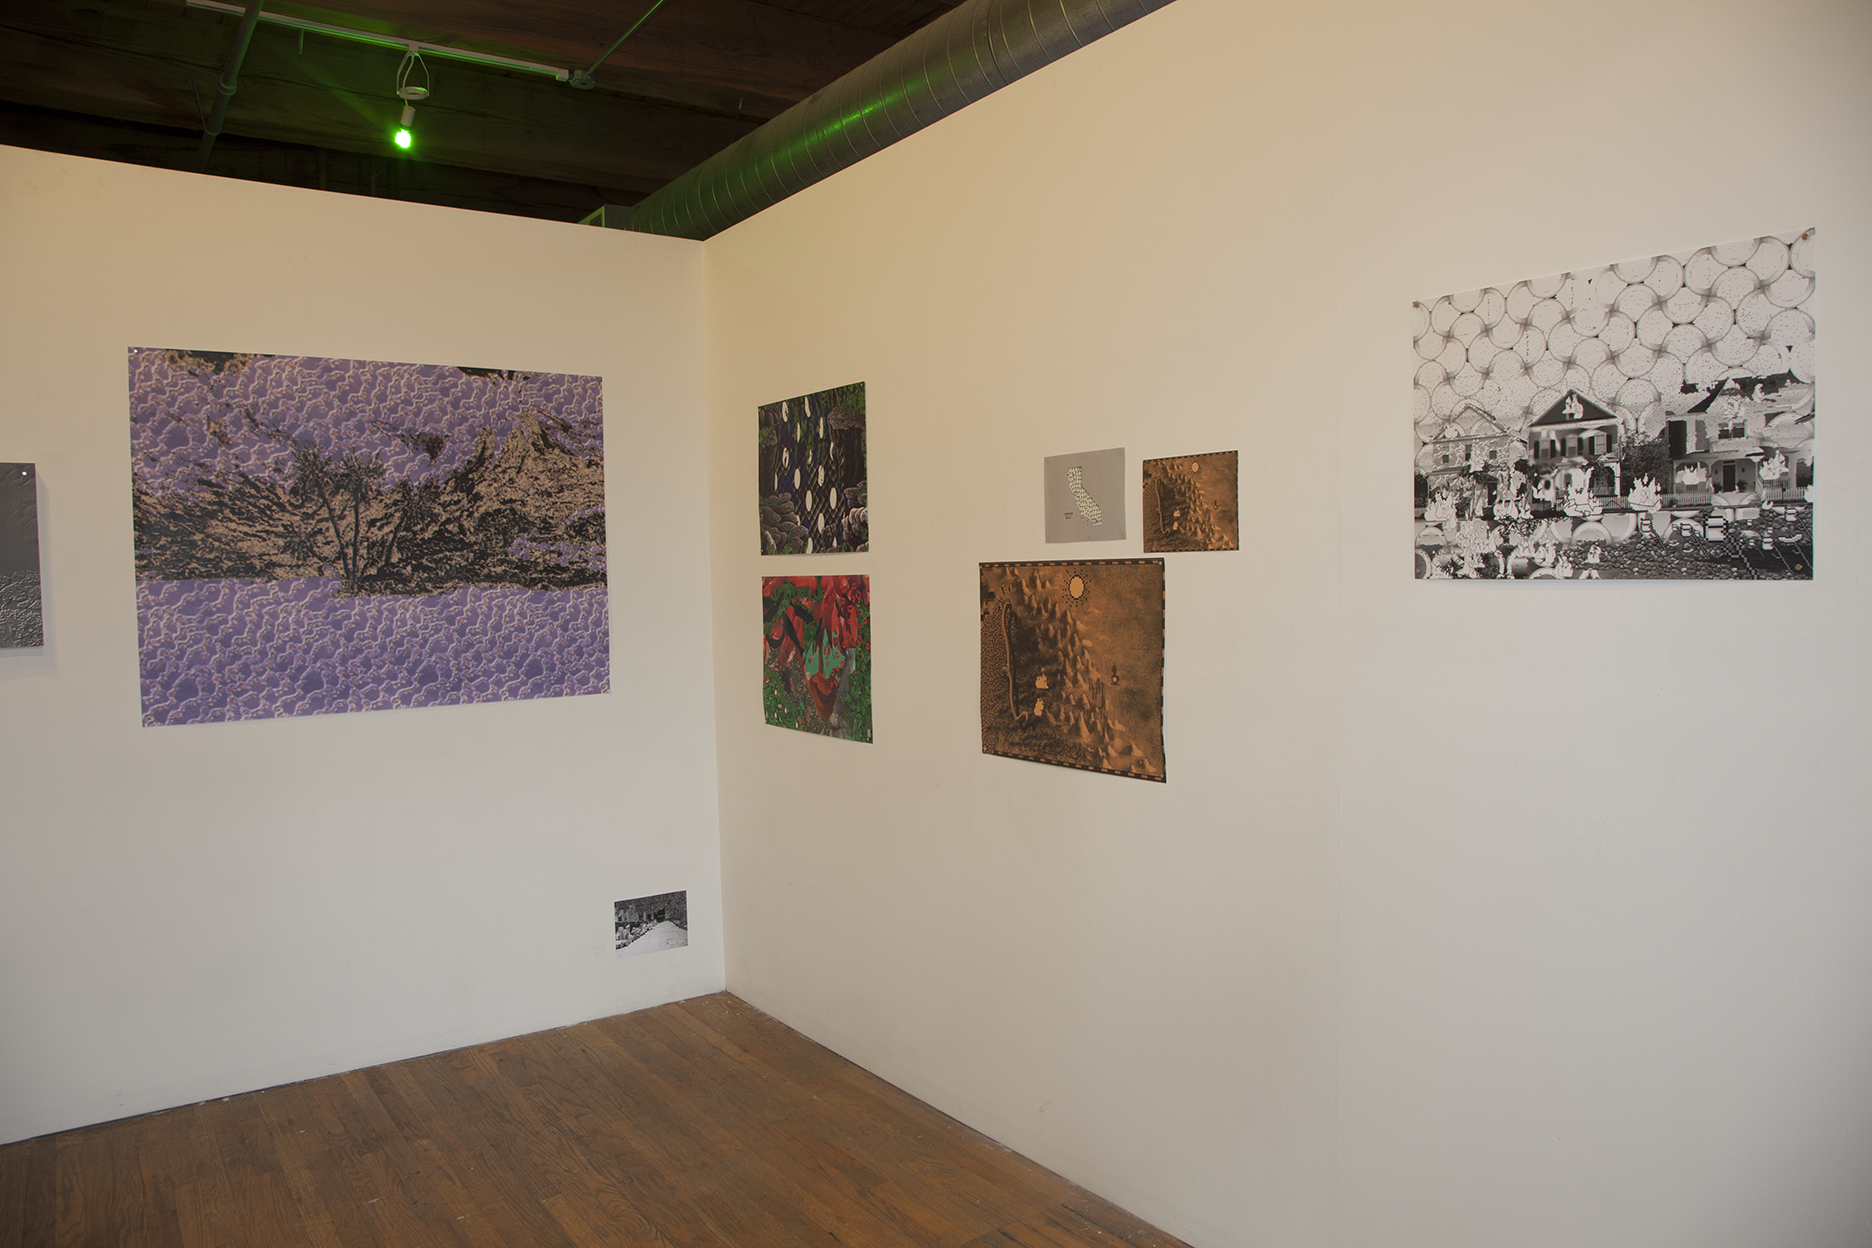 Installation view of eight large scale prints hung on white walls